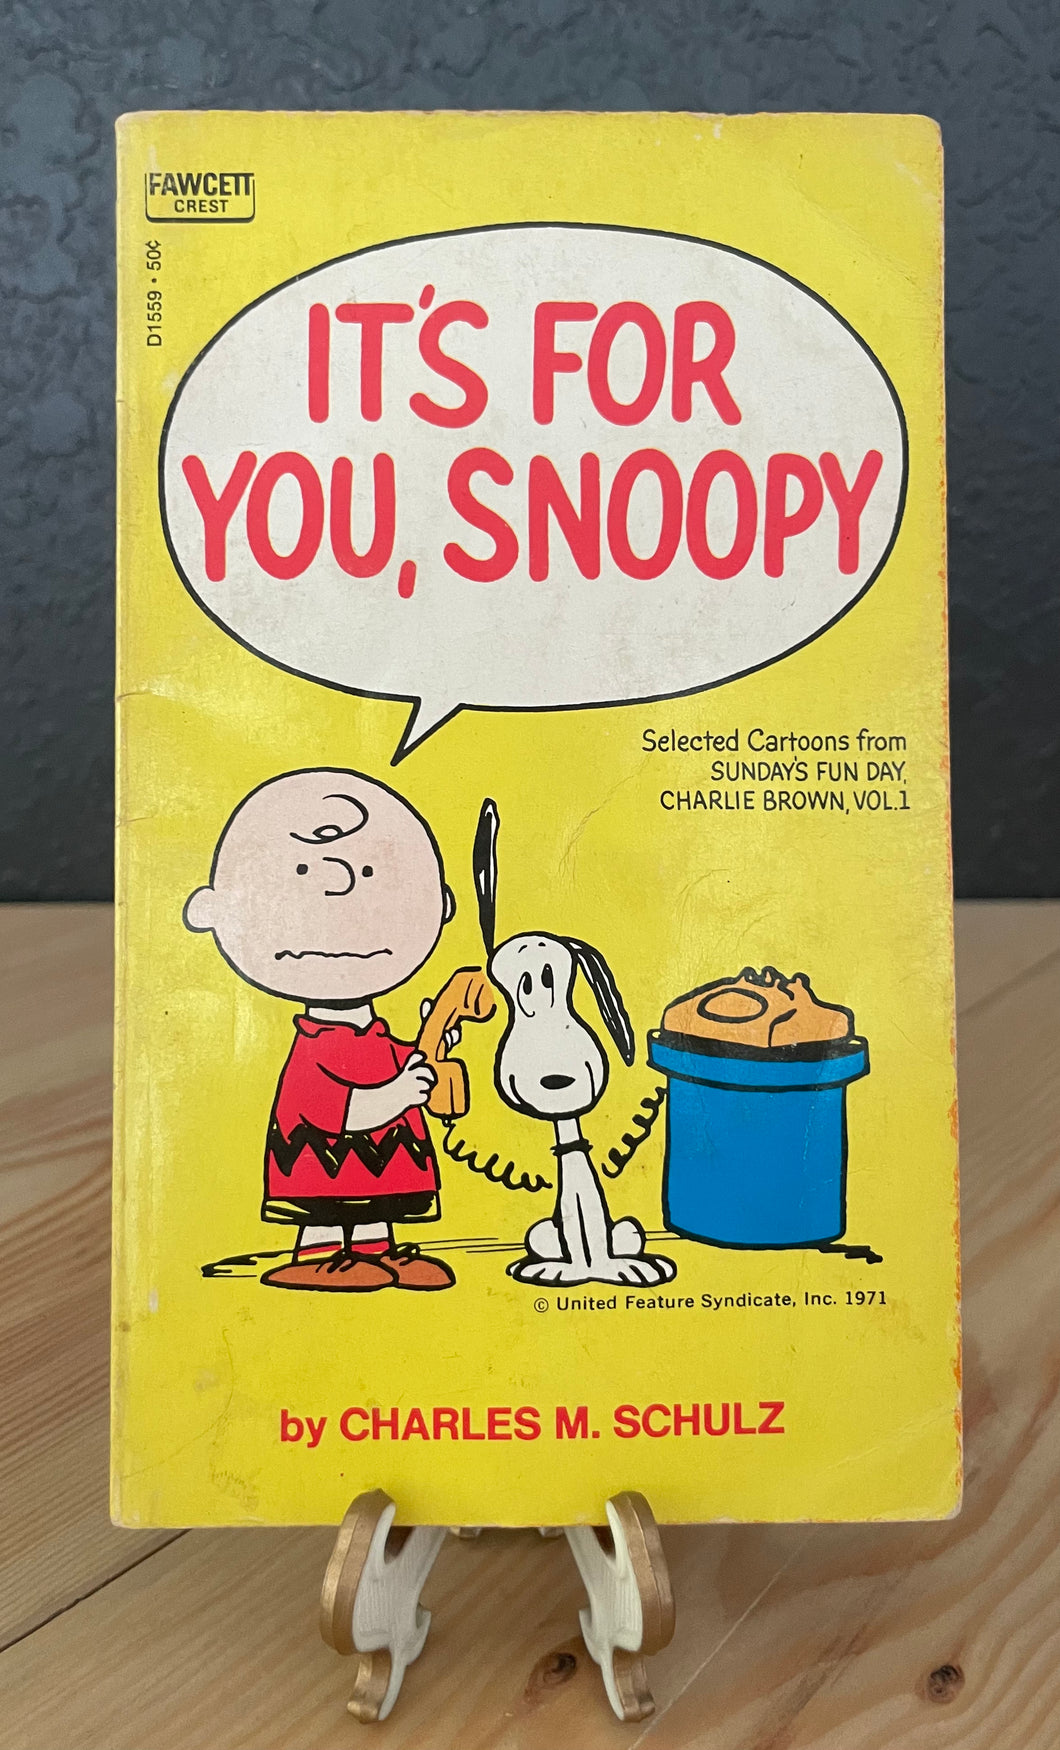 1975 “It’s For You, Snoopy” Vintage Paperback Book